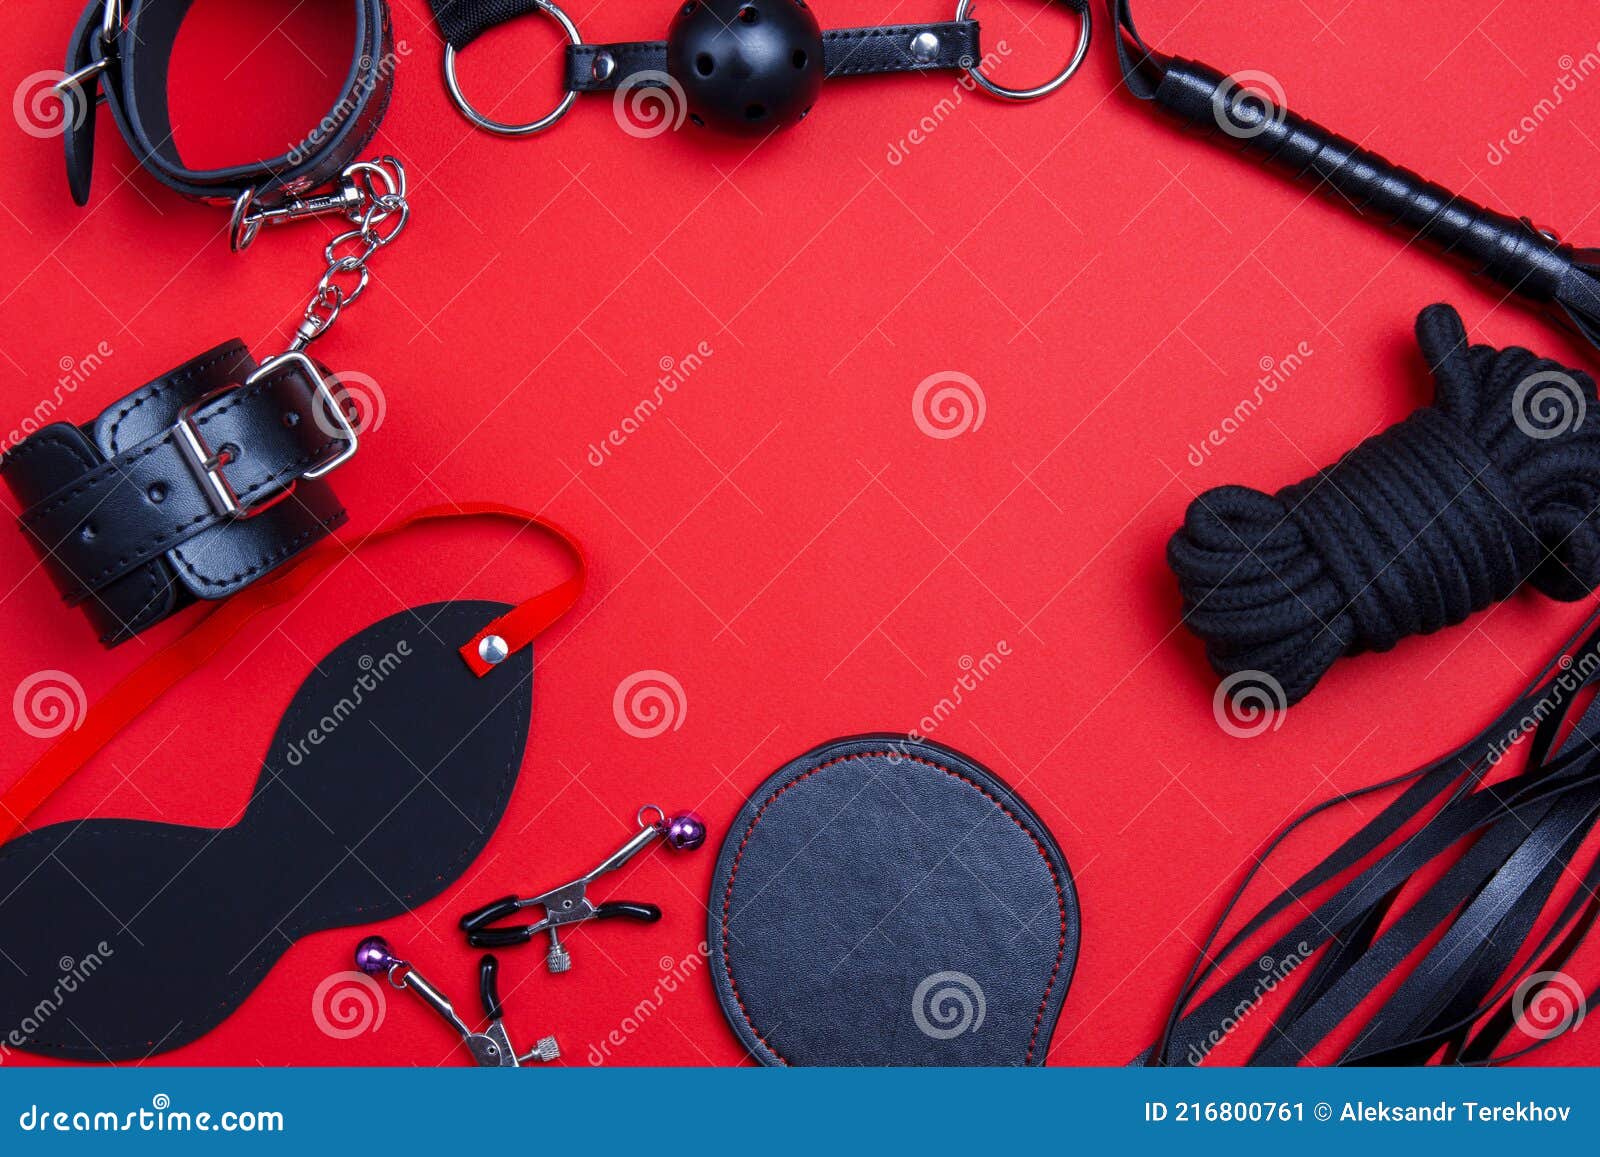 BDSM Toys for Sex and Punishment in Form a Frame Stock Image picture